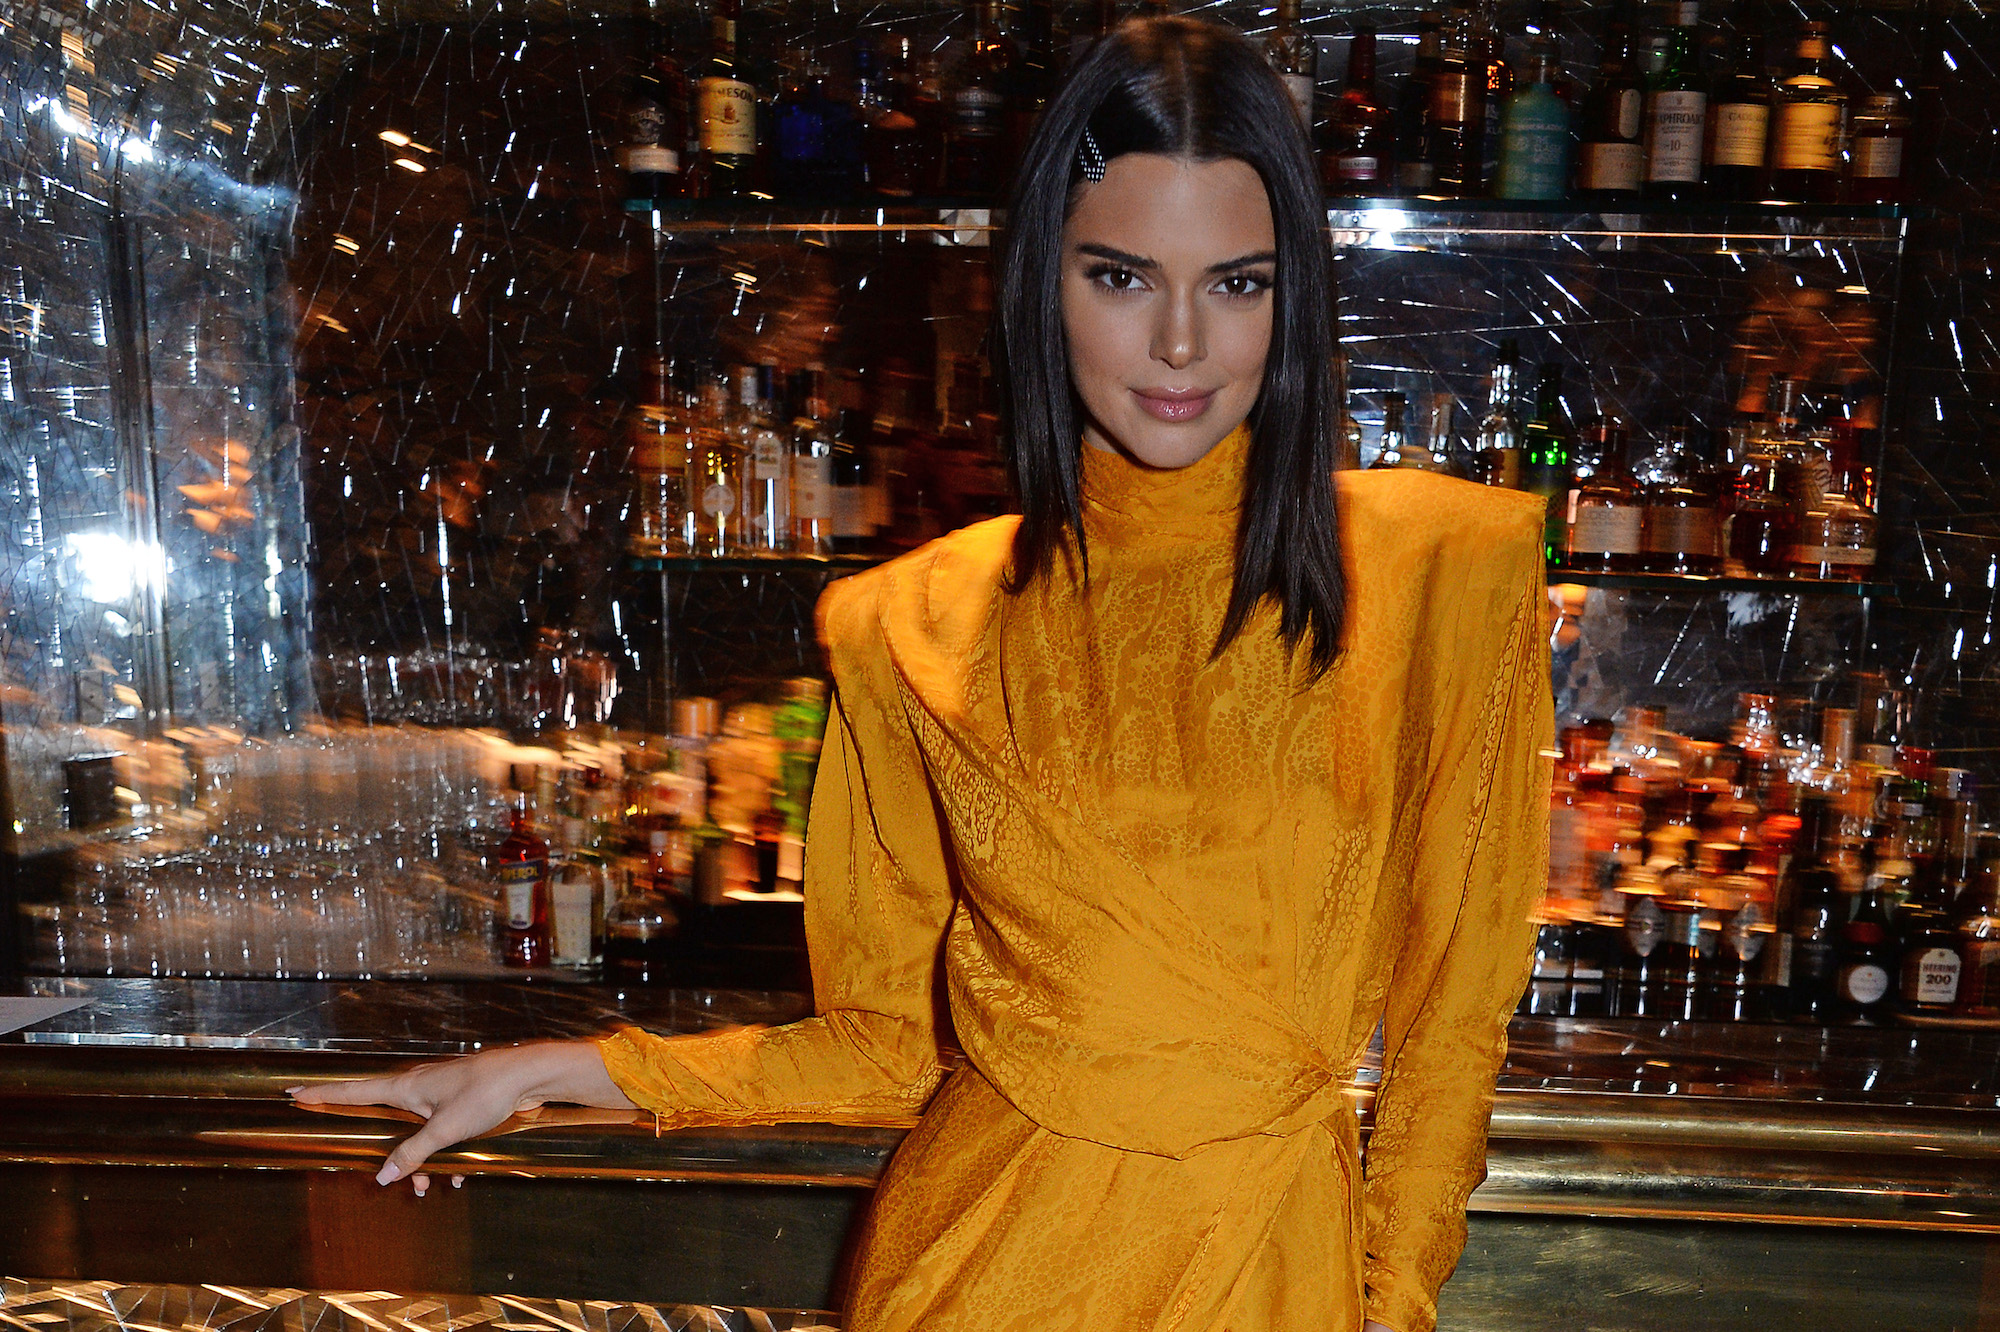 Kendall Jenner smiling in front of a bar